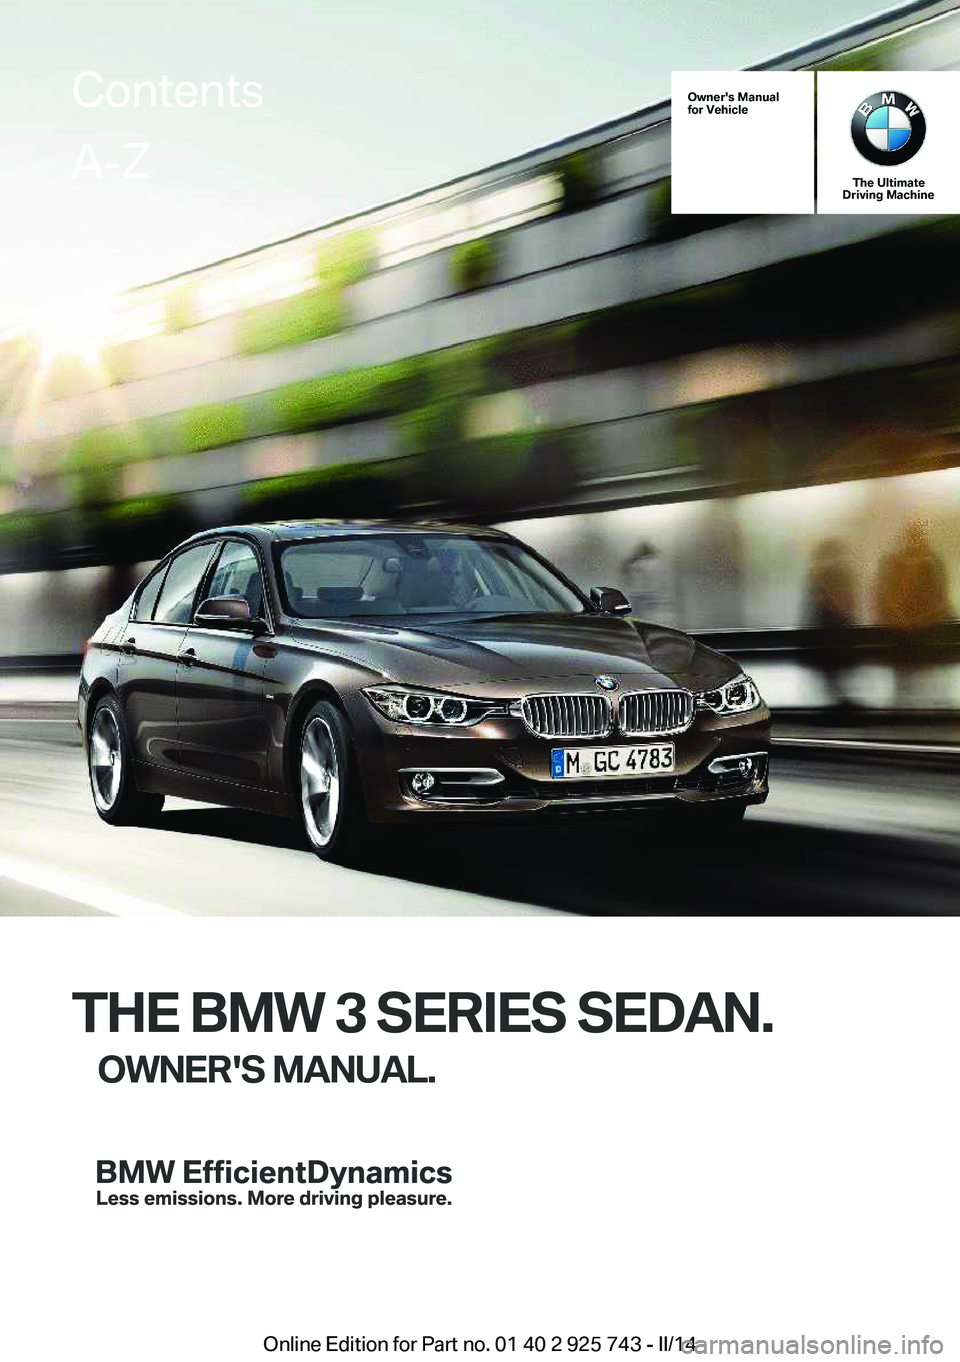 BMW 320I SEDAN 2014  Owners Manual Owner's Manual
for Vehicle
The Ultimate
Driving Machine
THE BMW 3 SERIES SEDAN.
OWNER'S MANUAL.
ContentsA-Z
Online Edition for Part no. 01 40 2 925 743 - II/14   